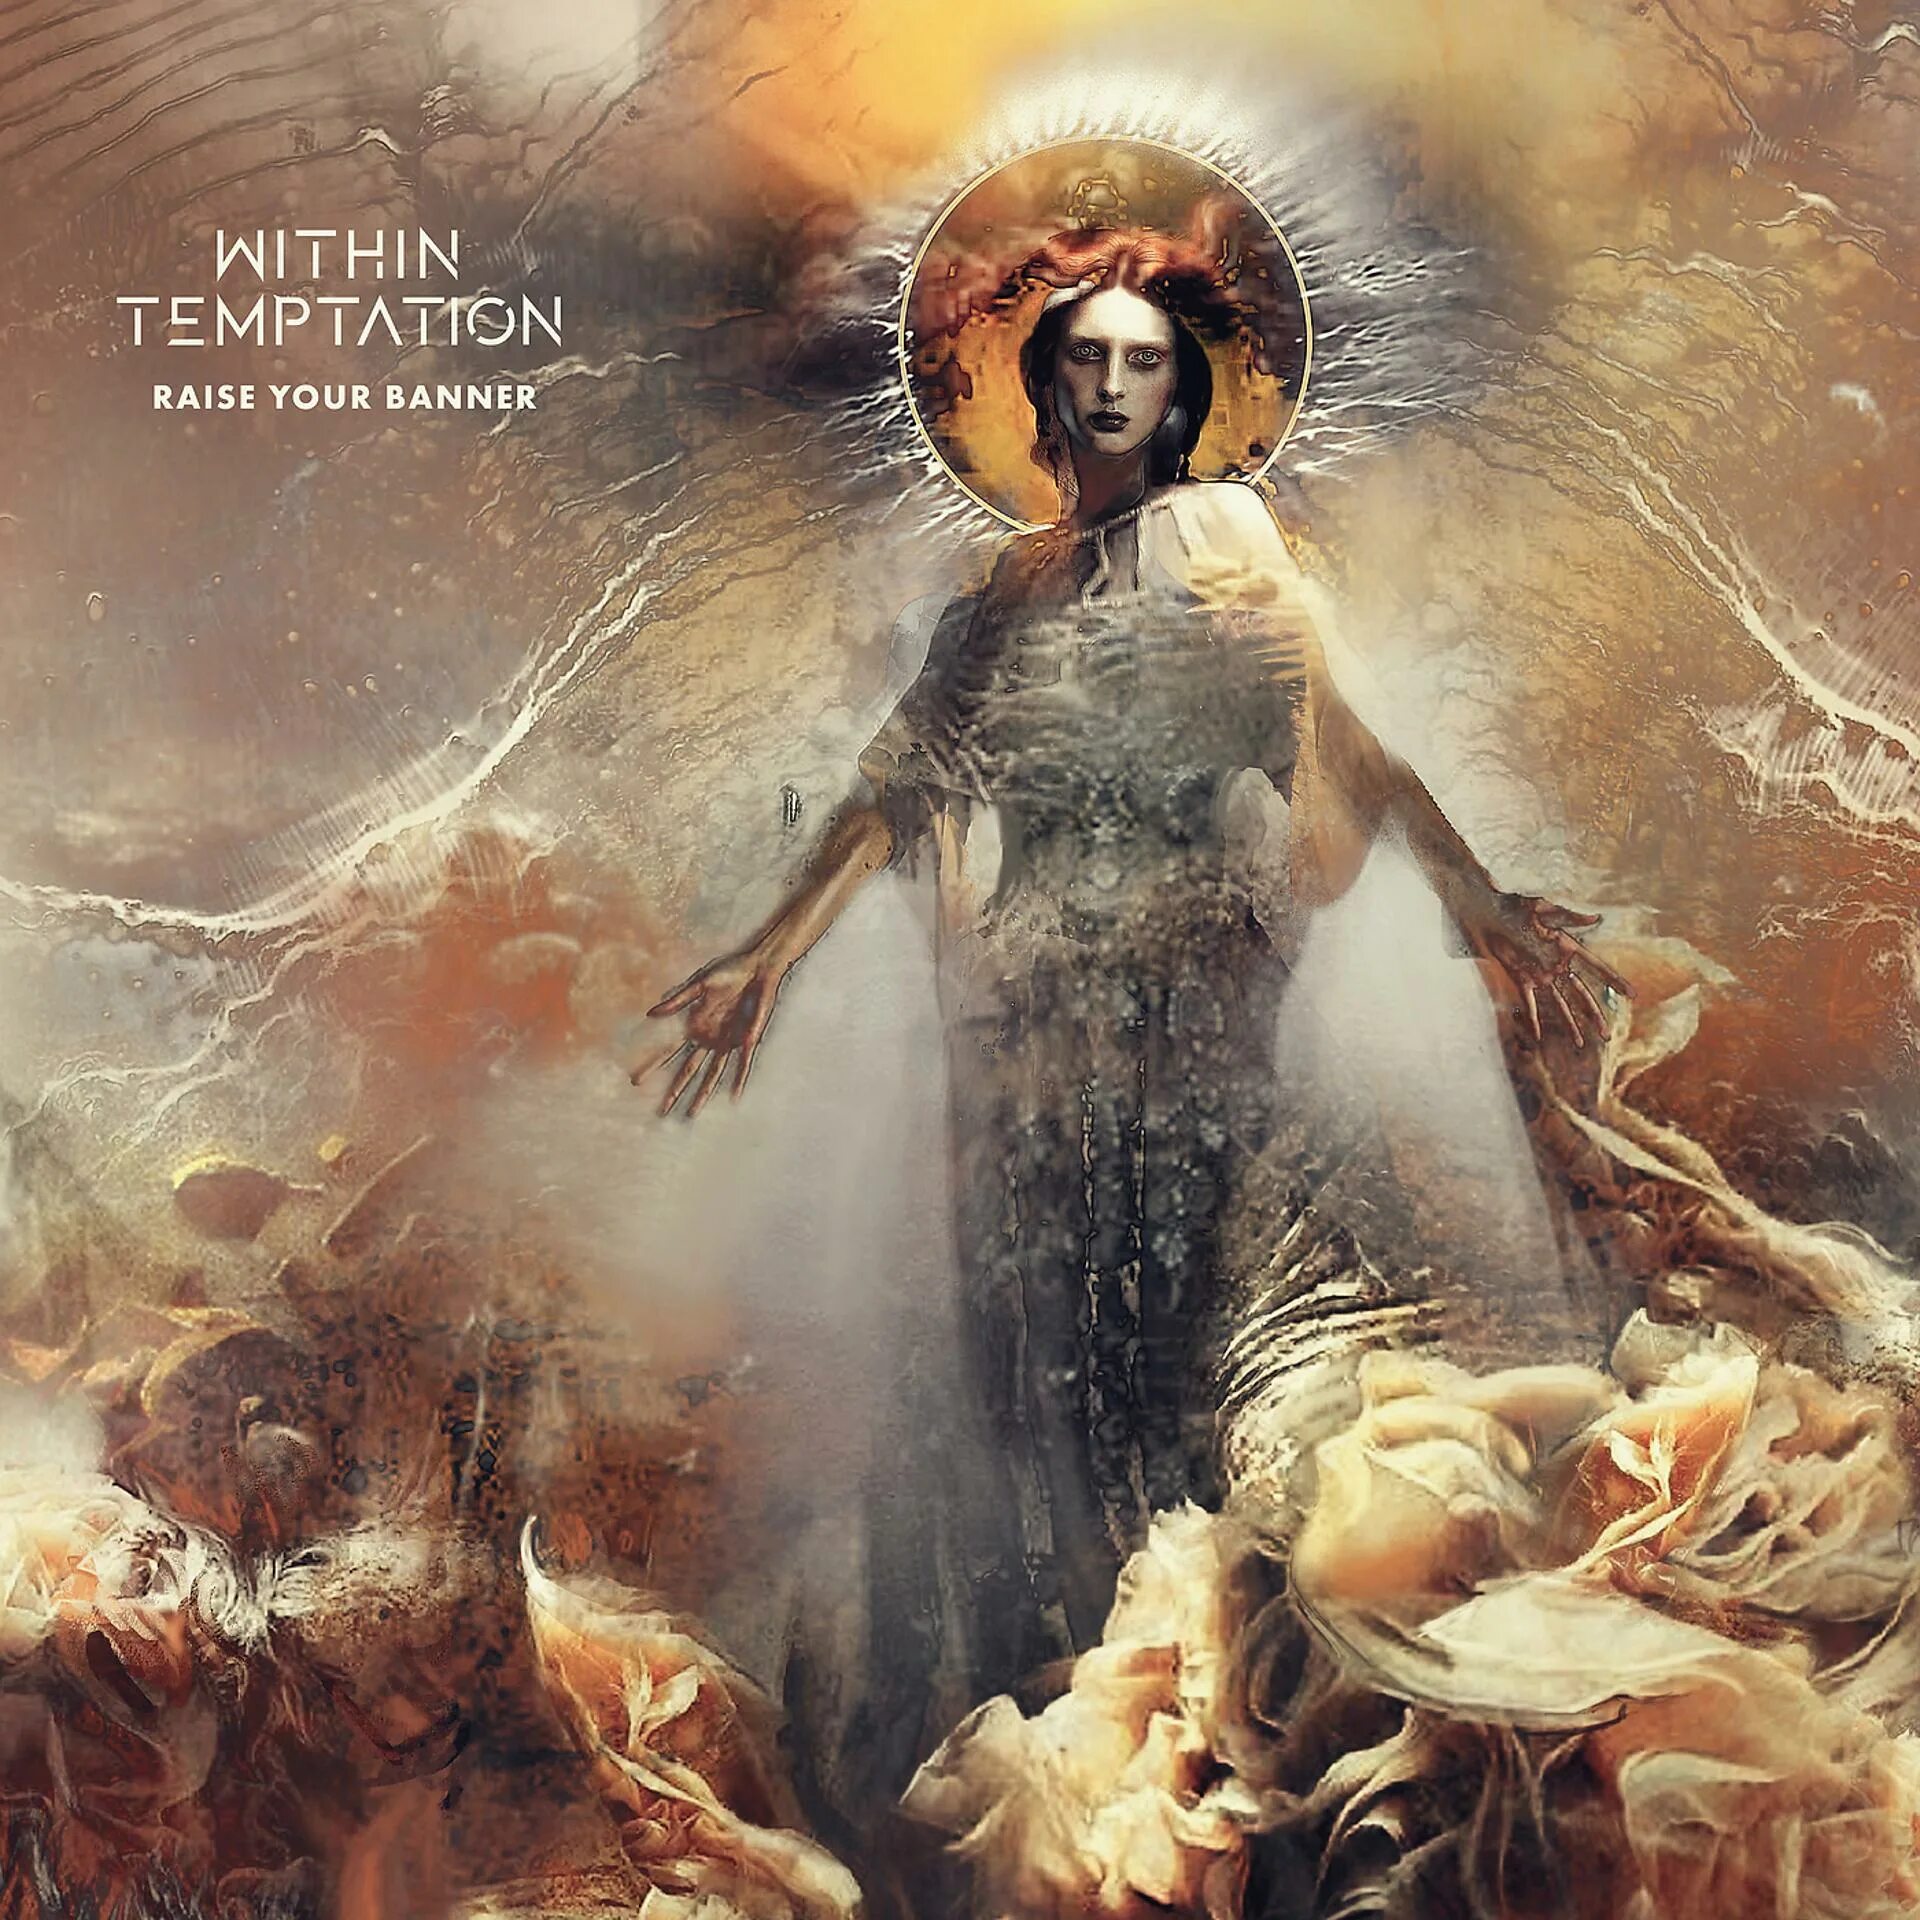 Within temptation альбомы. Within Temptation raise your banner. Raise your banner within Temptation обложка. Within Temptation albums.